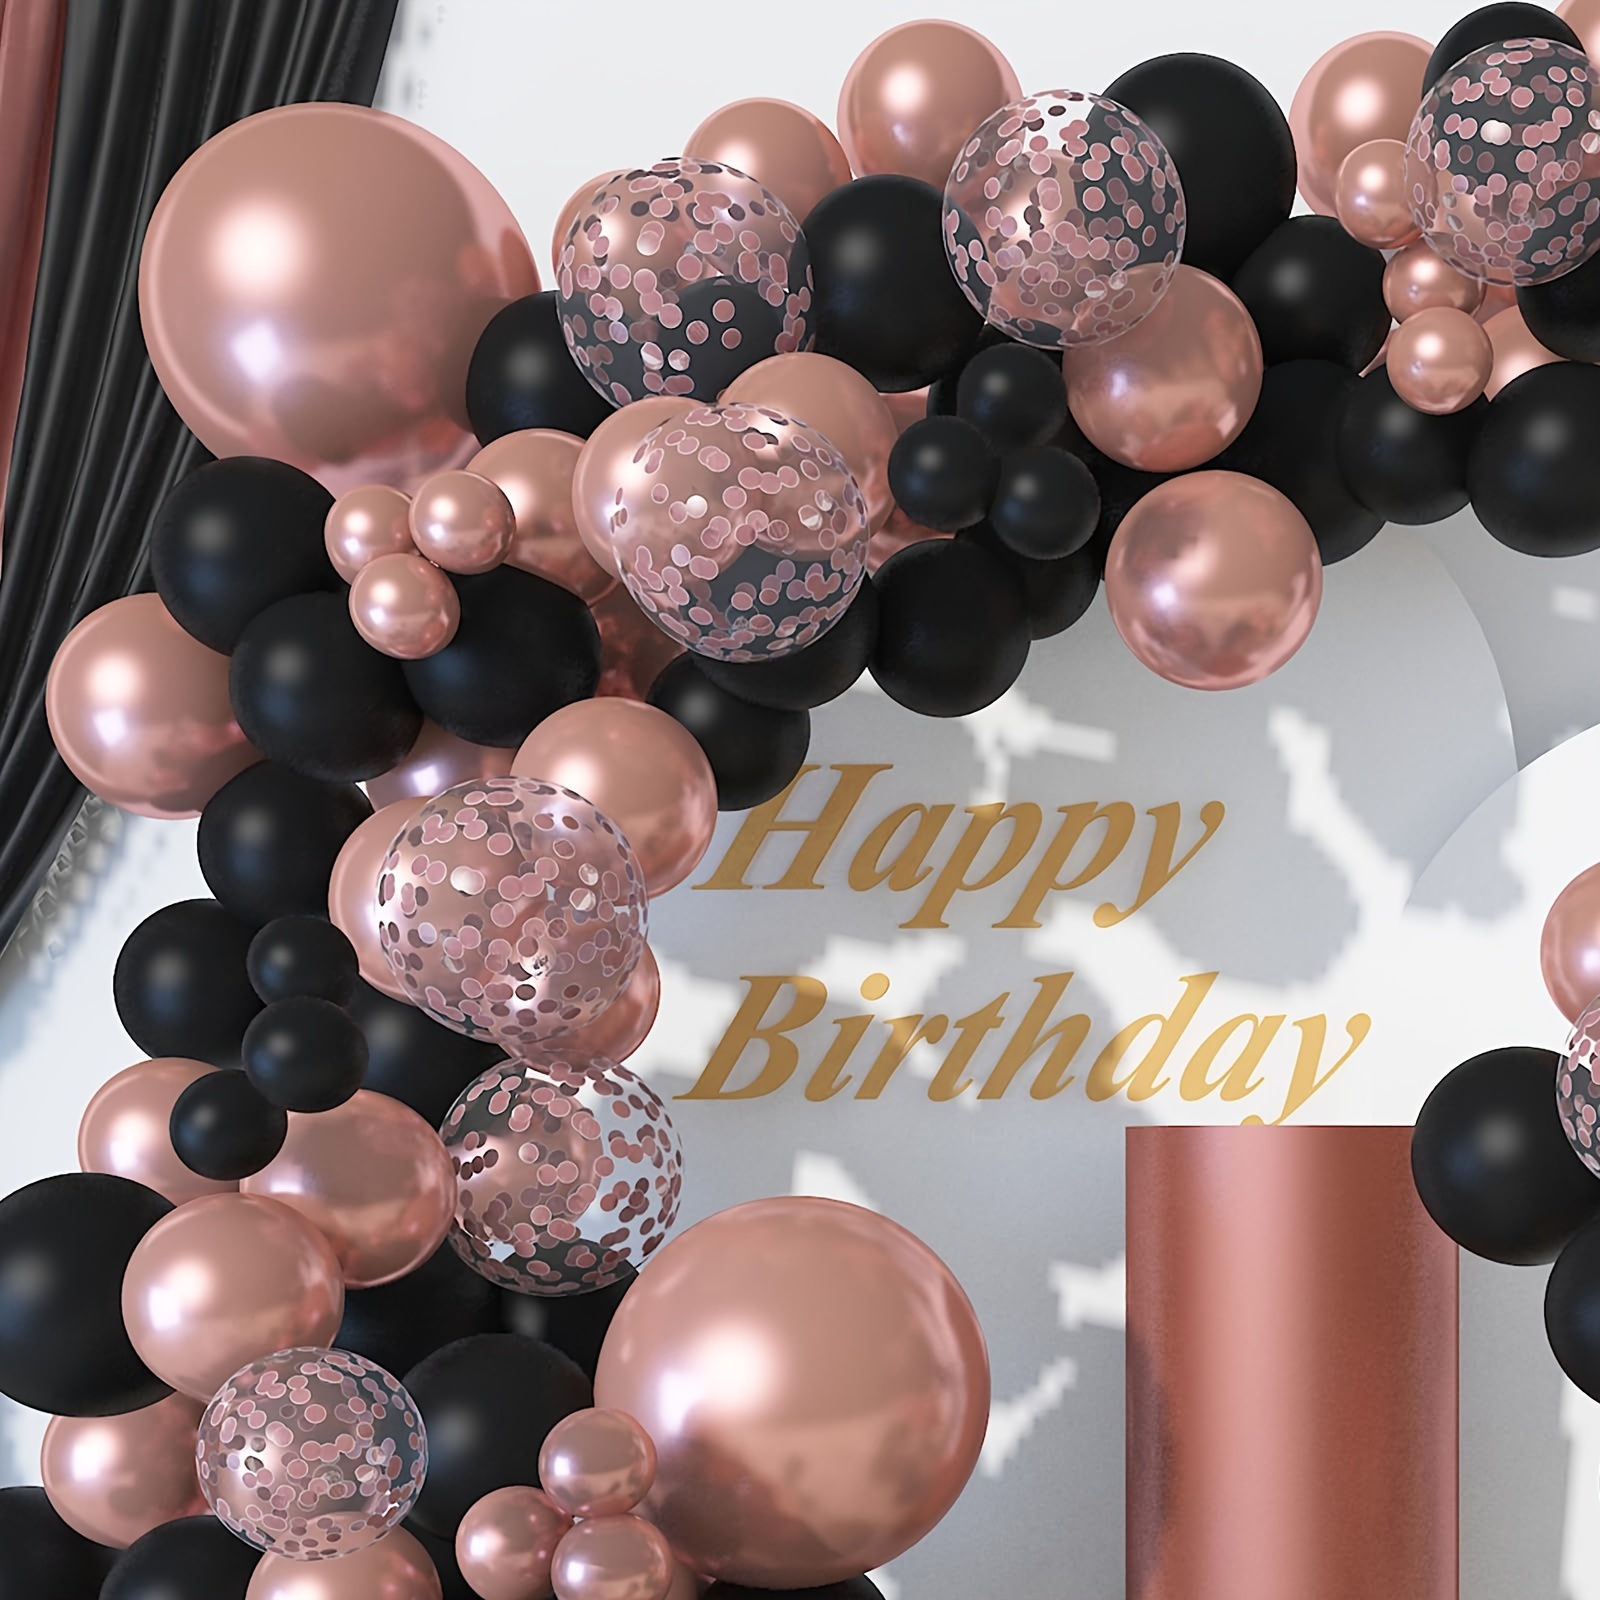  Rose Gold Balloon Arch Kit 135PCS Rose Gold Balloons Arch Rose  gold Confetti Balloons for Birthday Wedding Anniversary Bachelorette Party  Decorations : Home & Kitchen